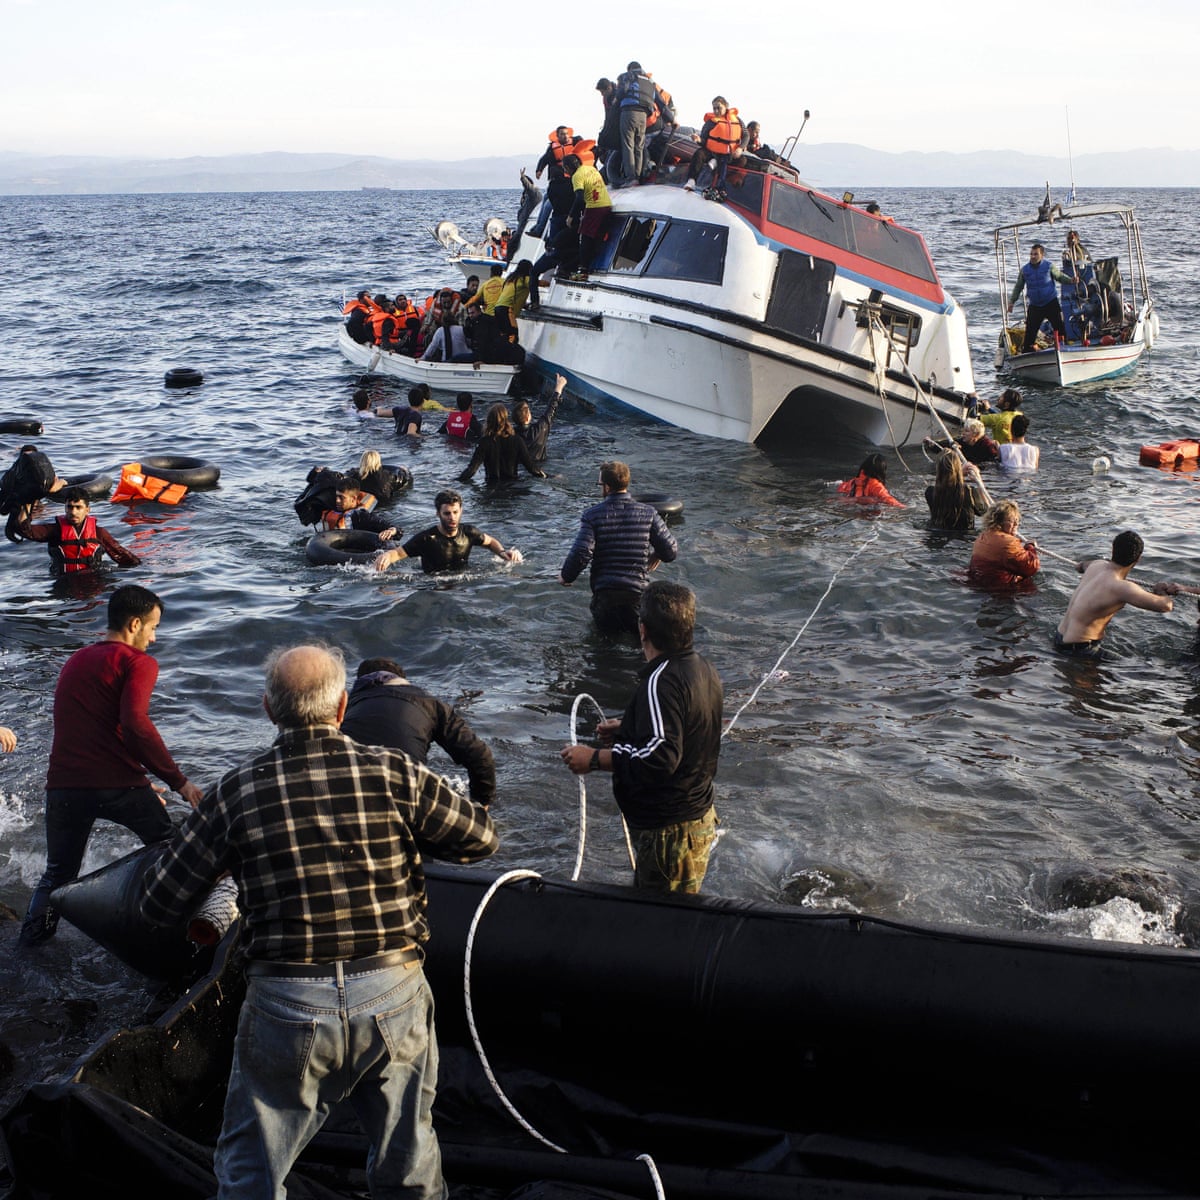 Ukraine or the Middle East? Greece applies varying rules on refugees 2